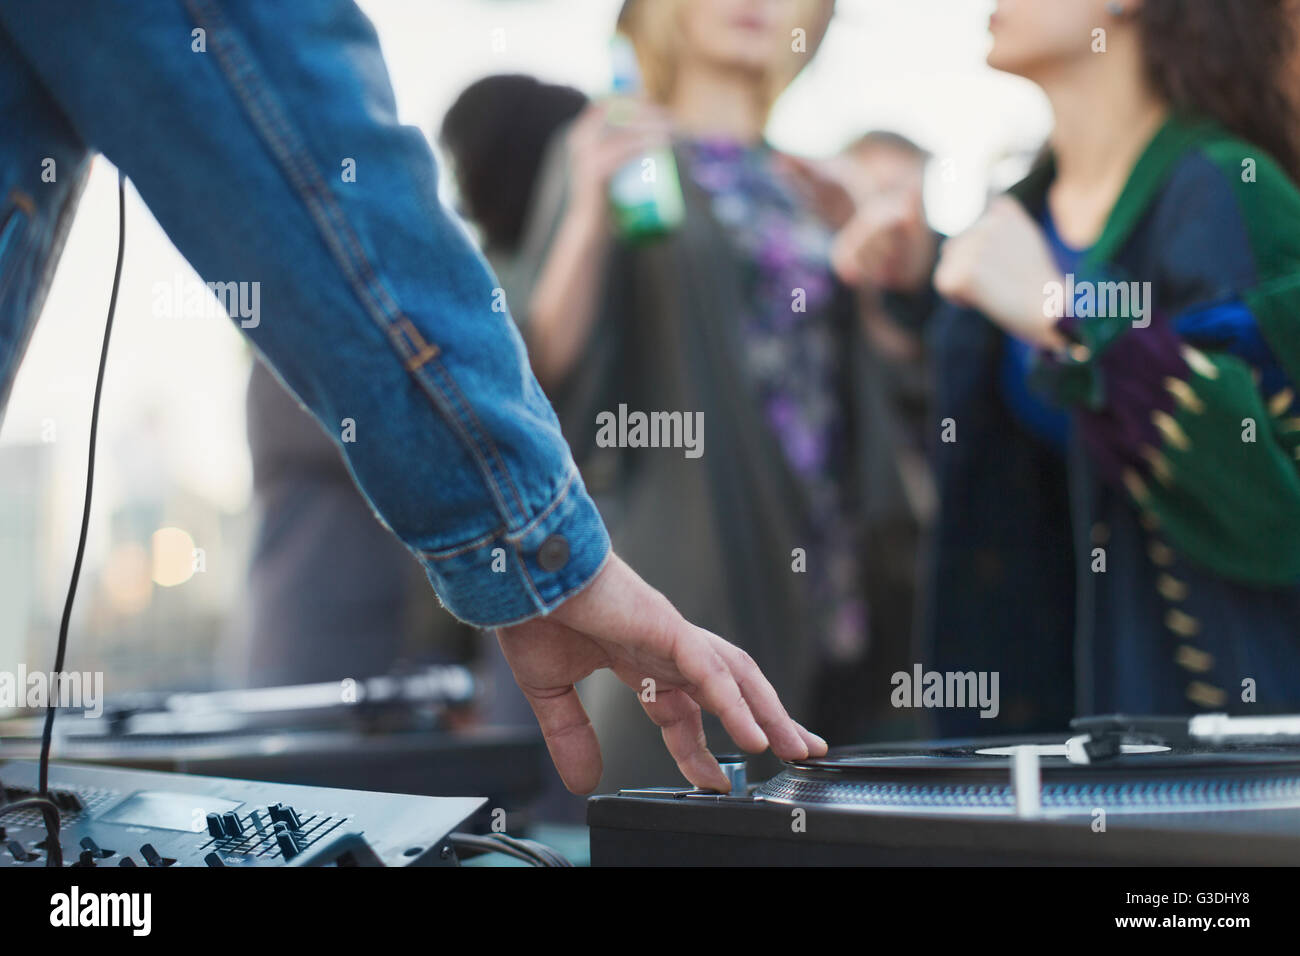 DJ spinning records at party Stock Photo